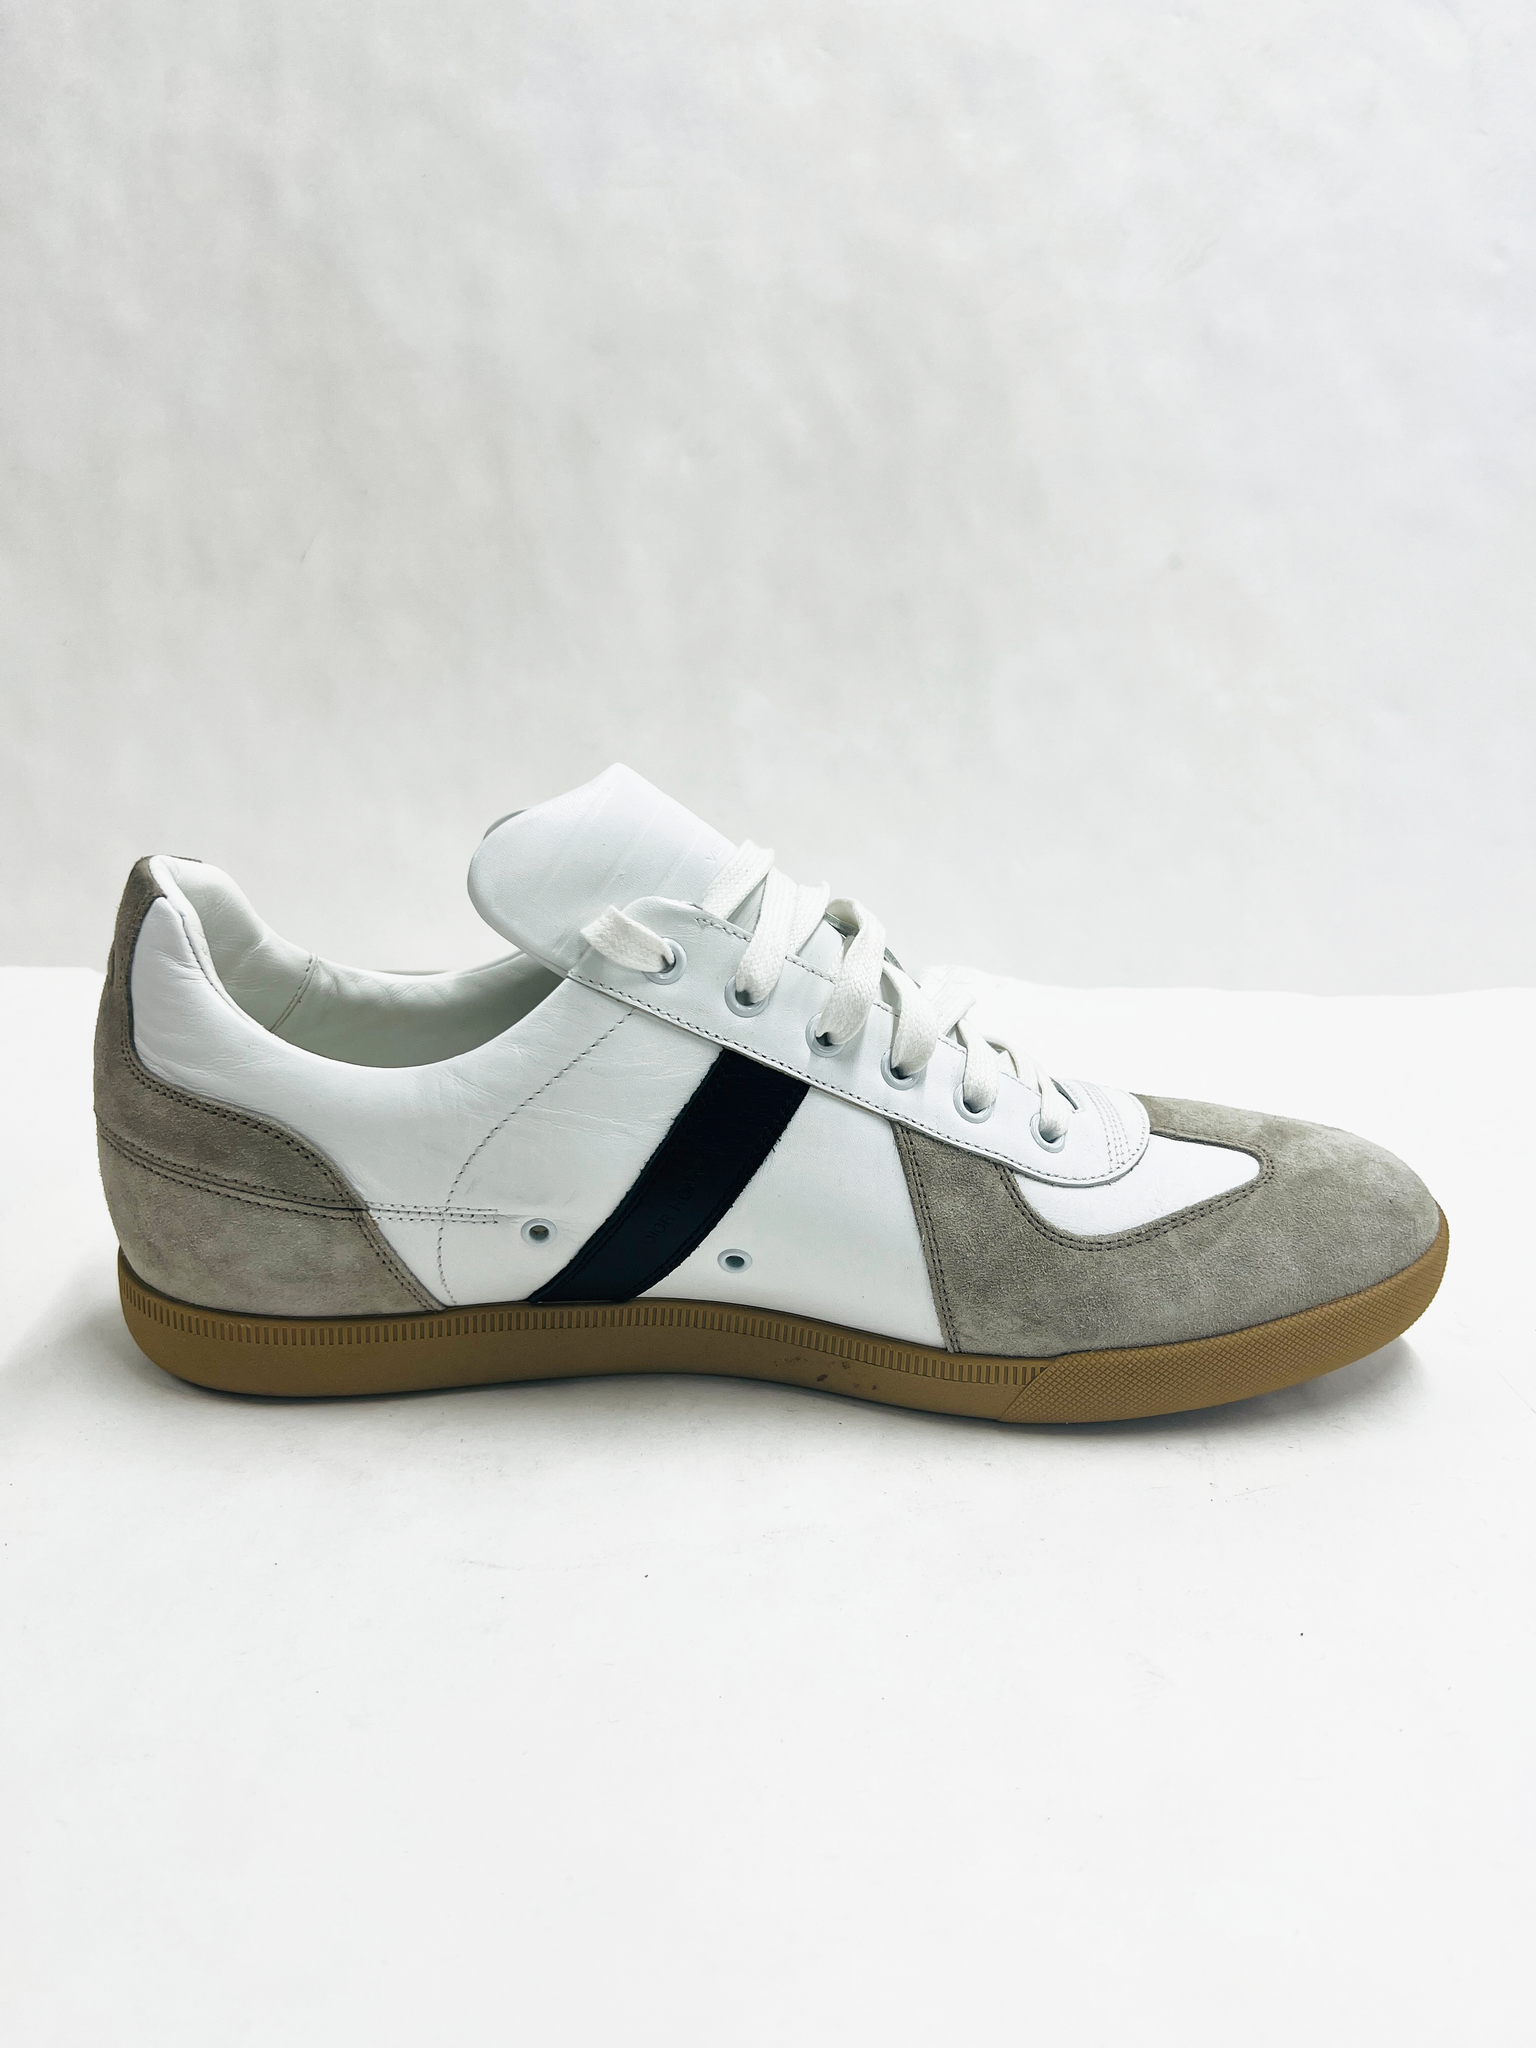 JB DIOR WHITE LEATHER B01 GERMAN ARMY TRAINER GRAYISH SUEDE AND BLACK STRIP SNEAKER SIZE 46-4